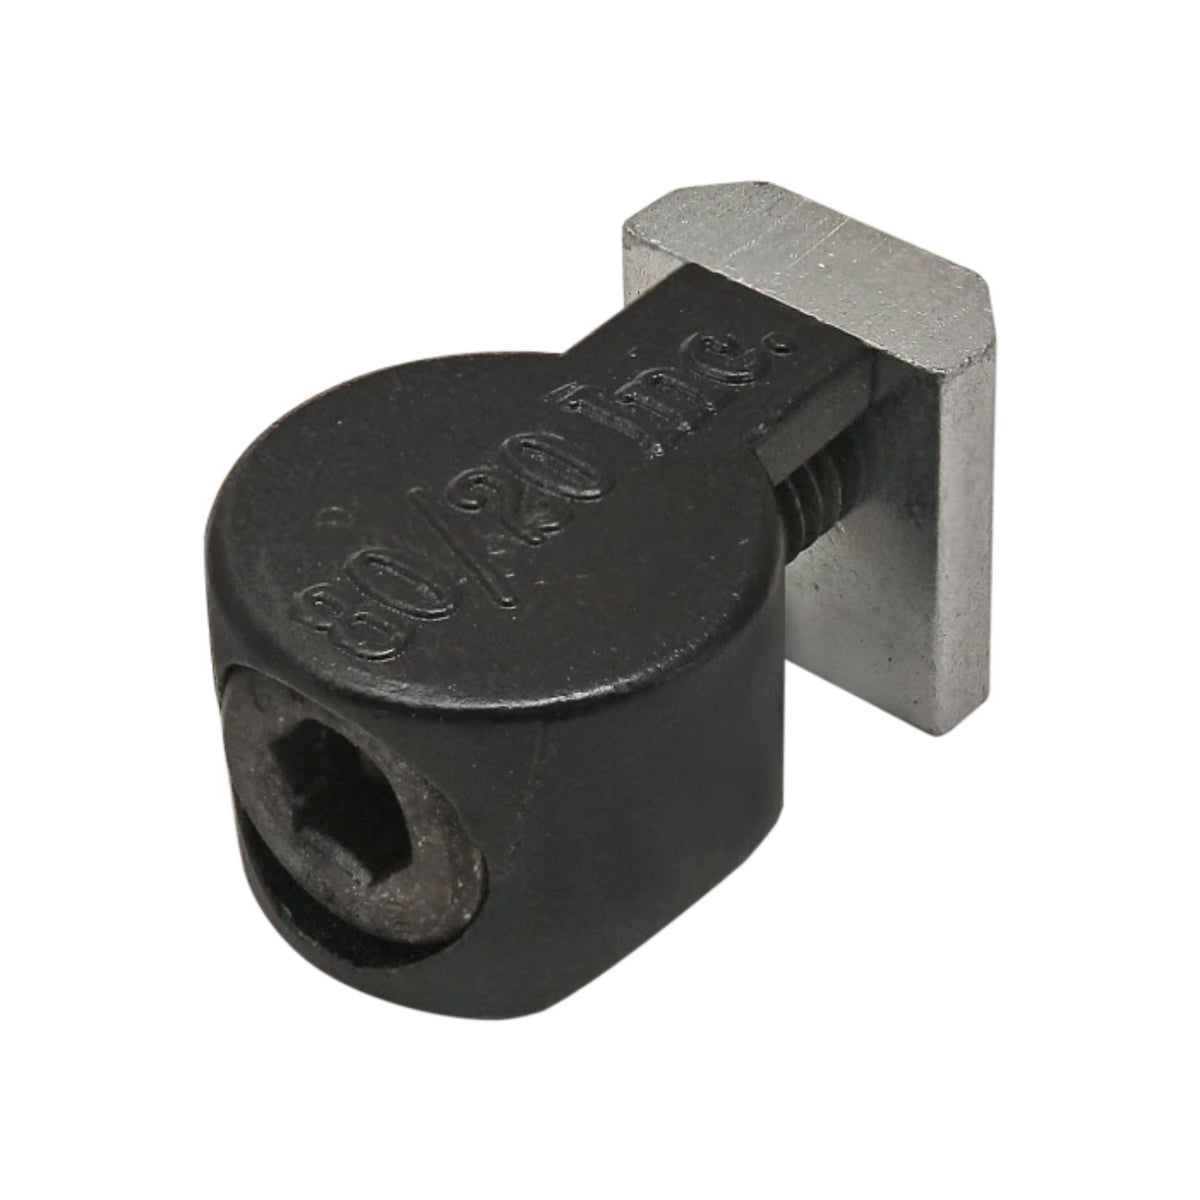 top side view of a black, metal anchor fastener assembly with a round piece on the left that has a screw inserted at the end, and a square piece connected to the other end